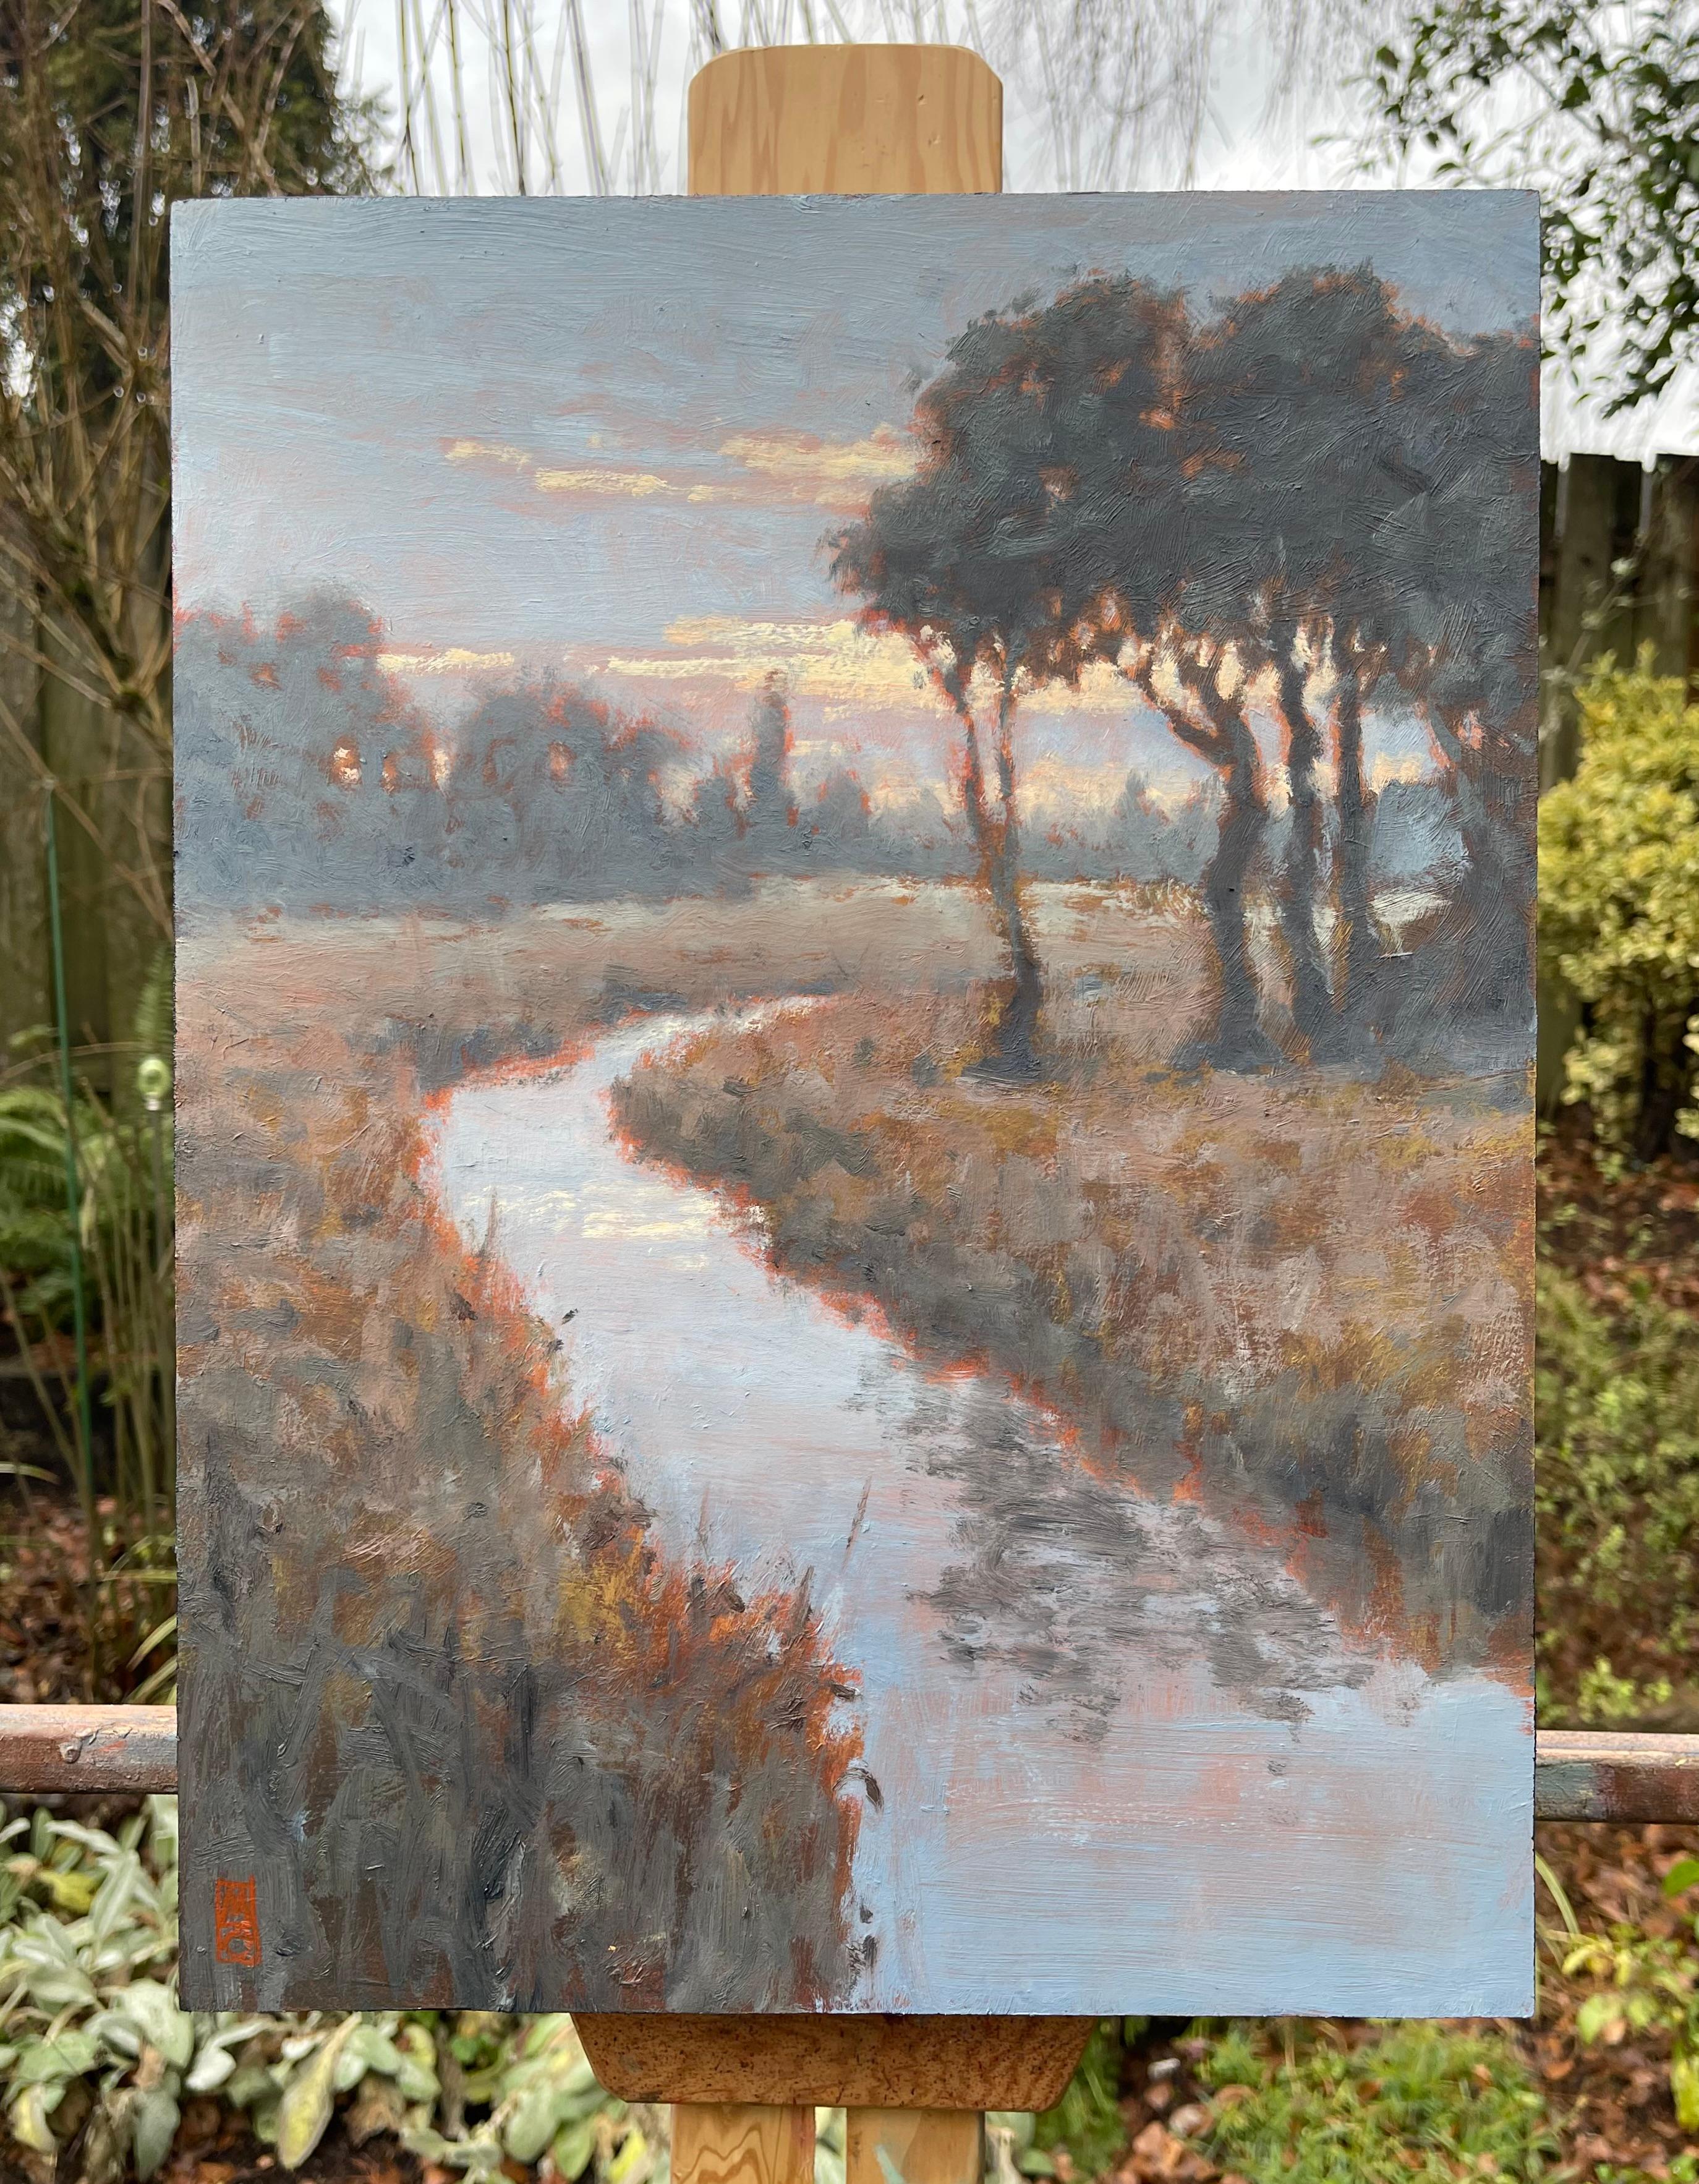 <p>Artist Comments<br>Artist Michael Orwick presents a pastoral scene of a riverbend flowing through a meadow. The impressionist rendering displays the delicate lighting permeating through the clouds and reflecting on the water. Michael paints with